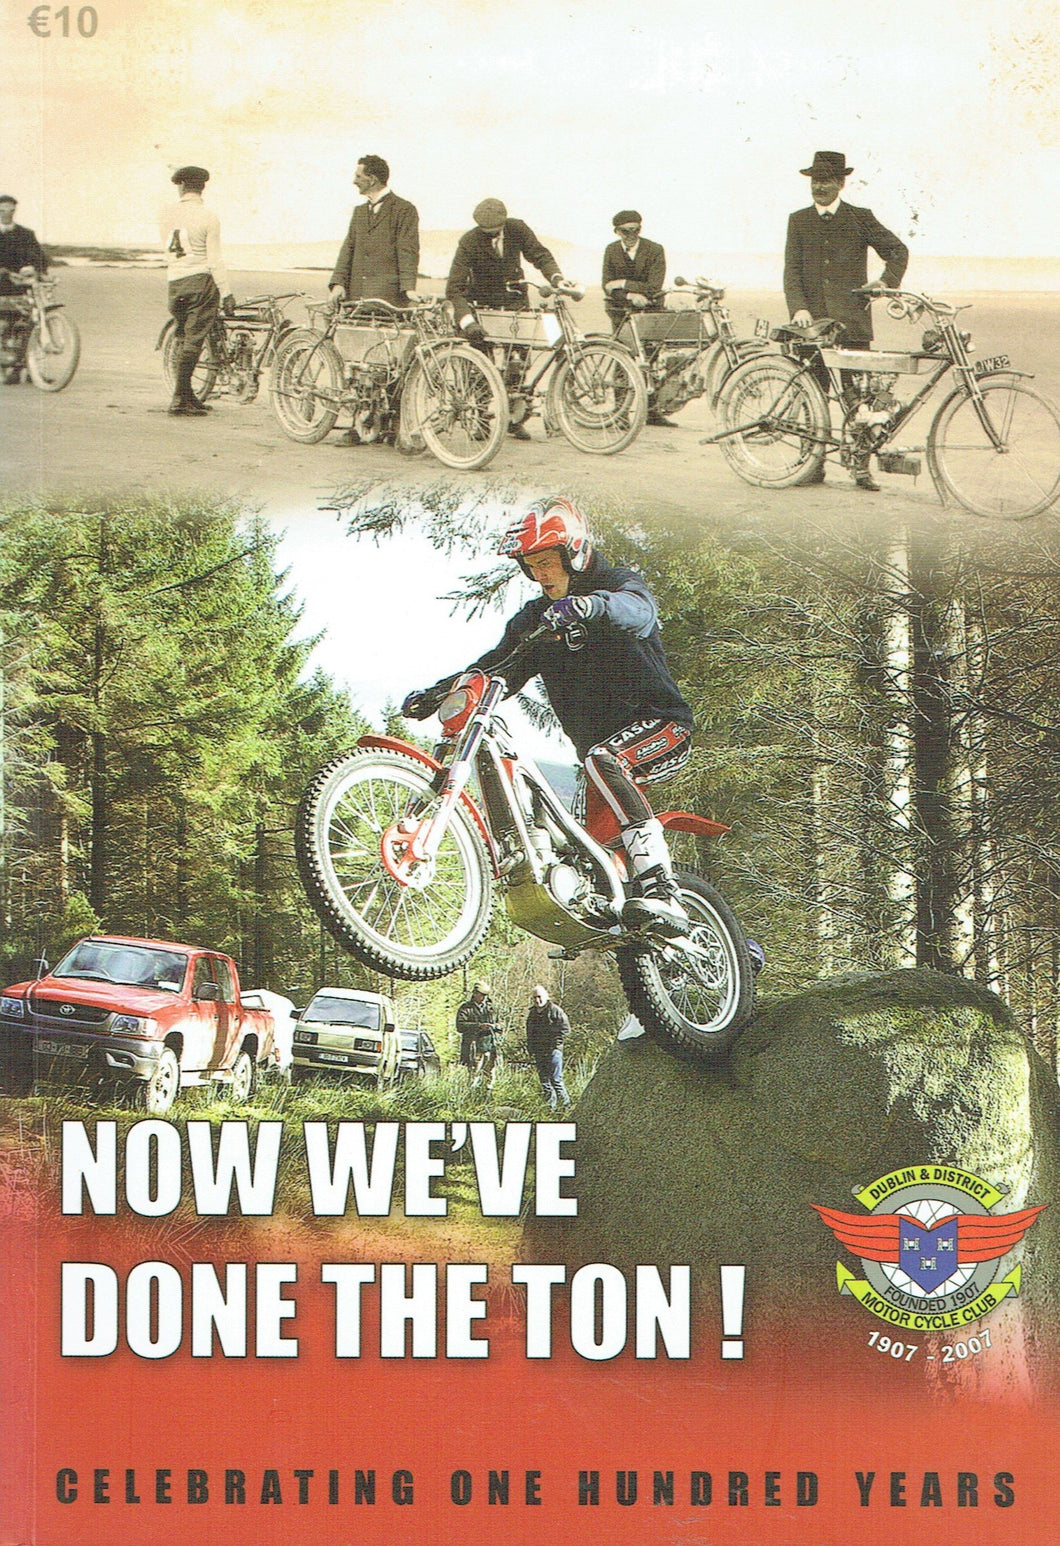 Now We've Done The Ton! Celebrating One Hundred Years - Dublin and District Motor Cycle Club 1907-2007